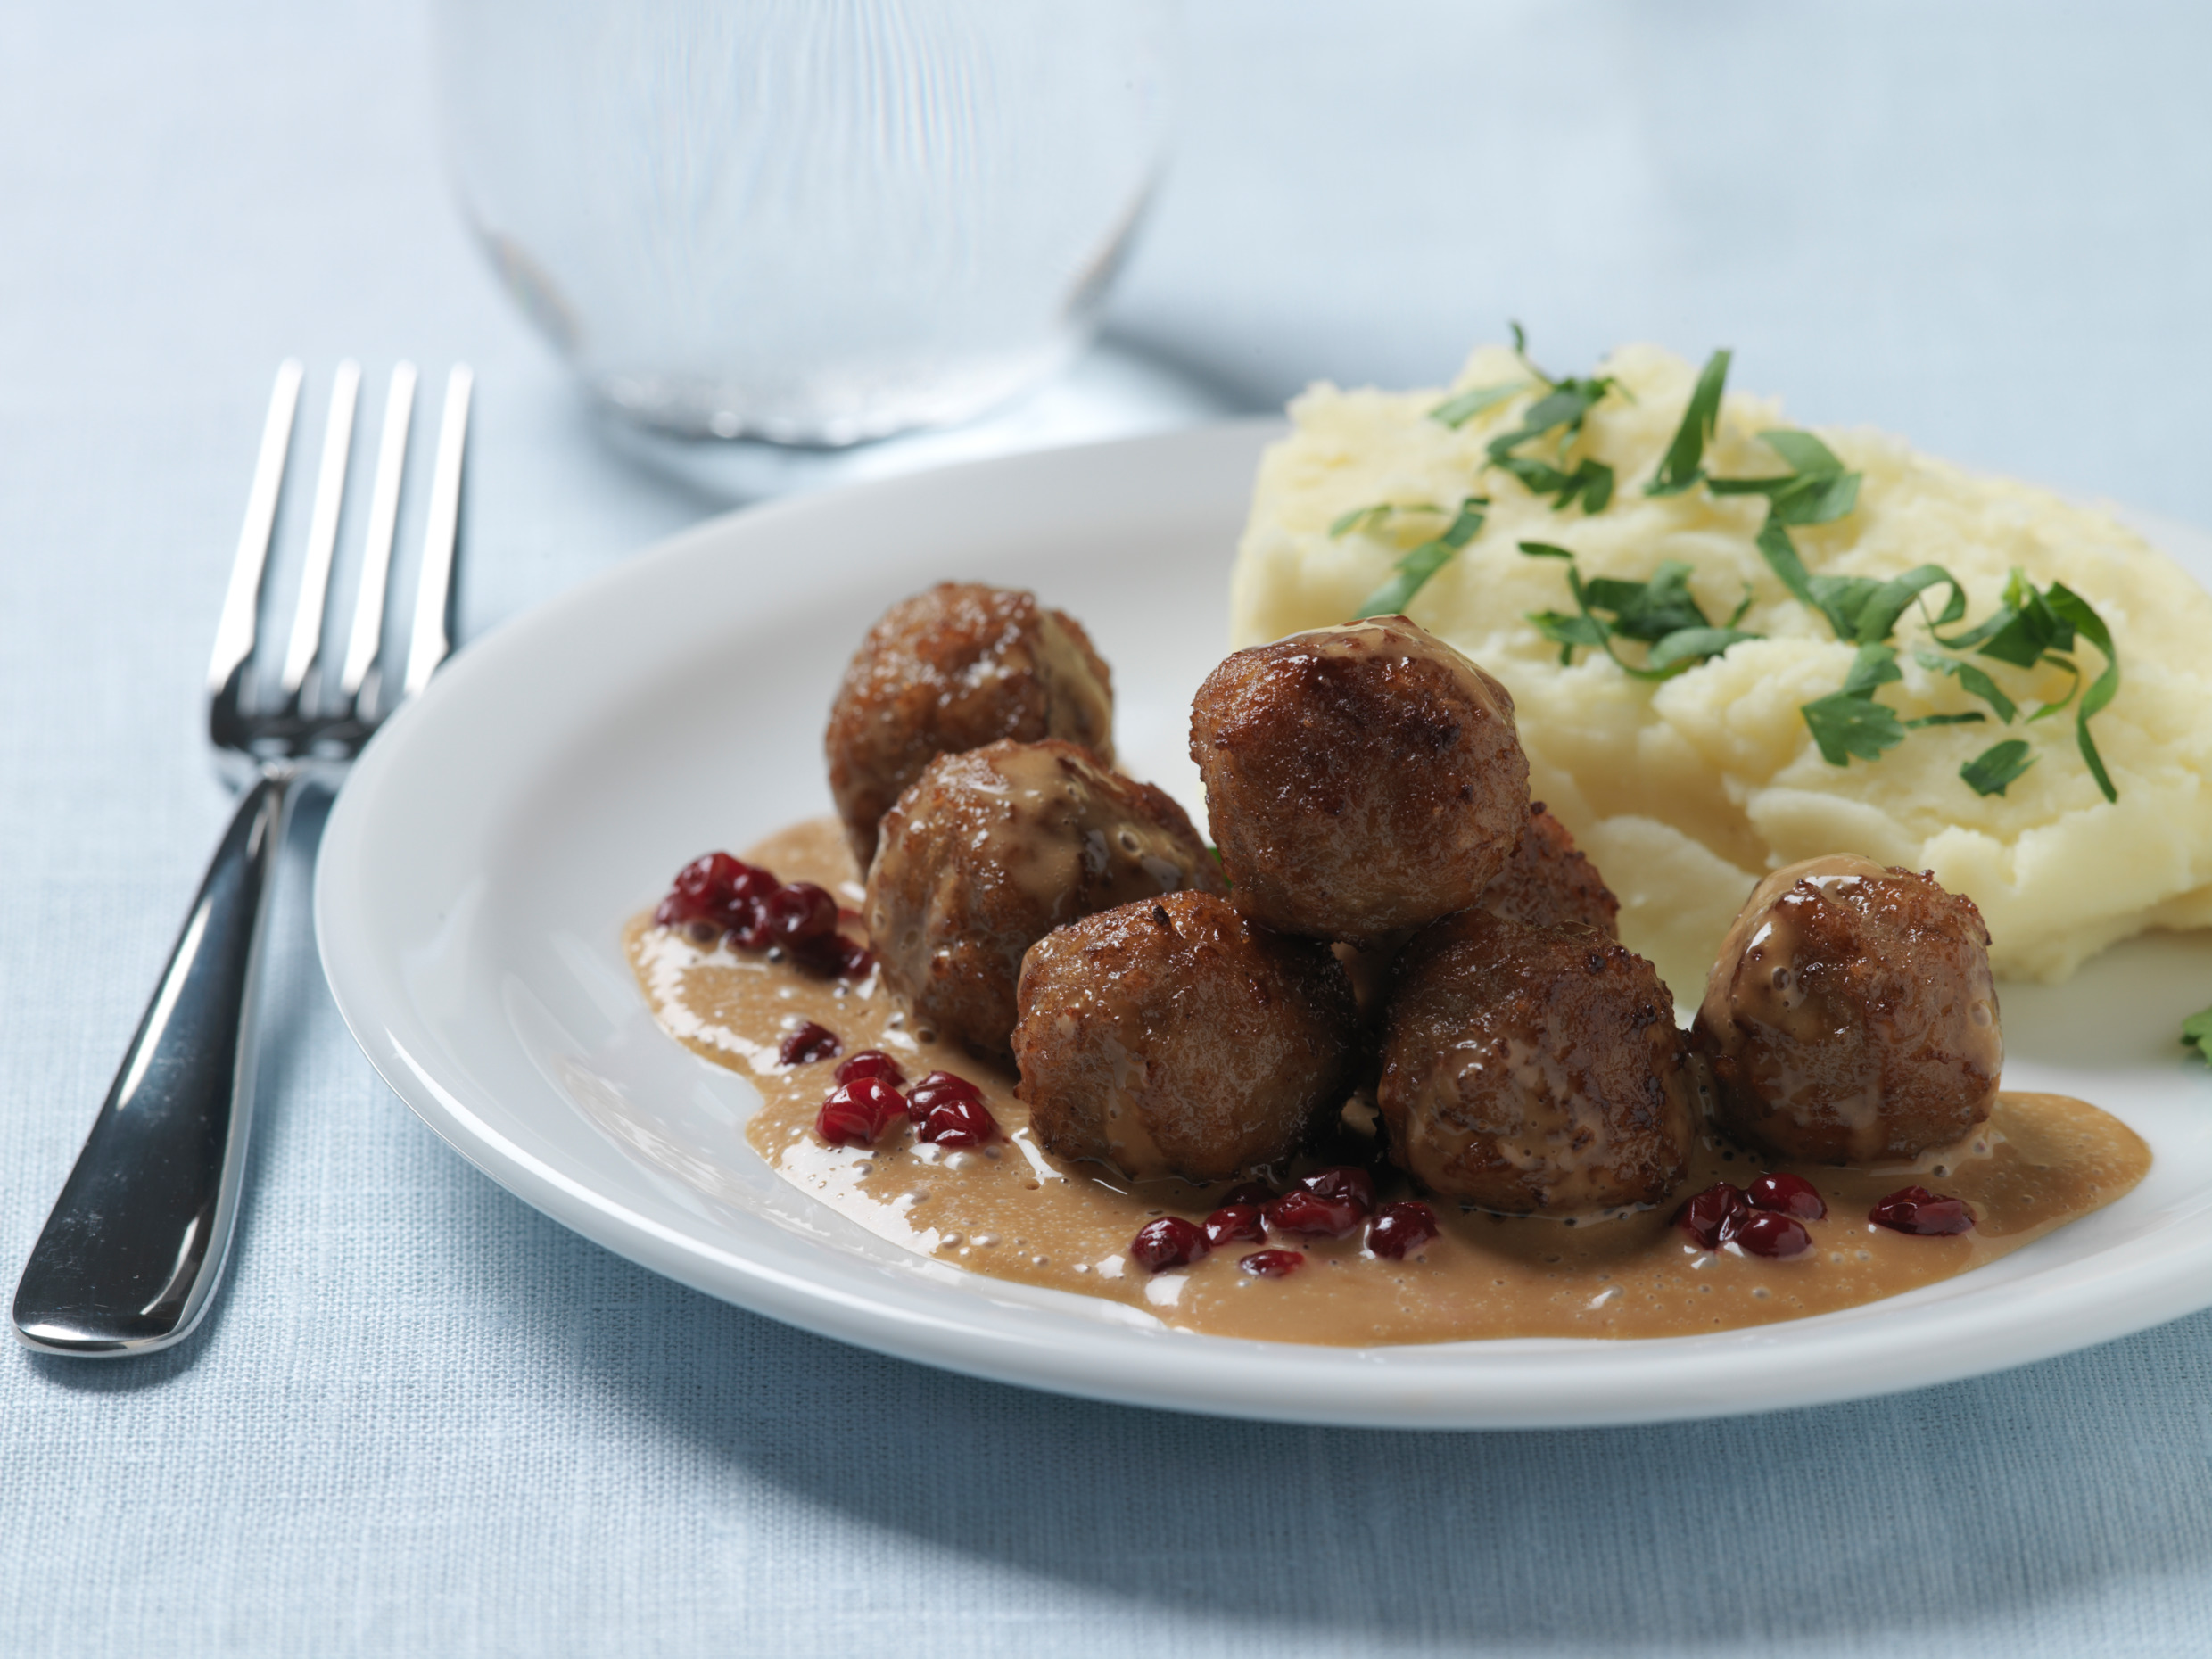 10 things to know about Swedish food | sweden.se